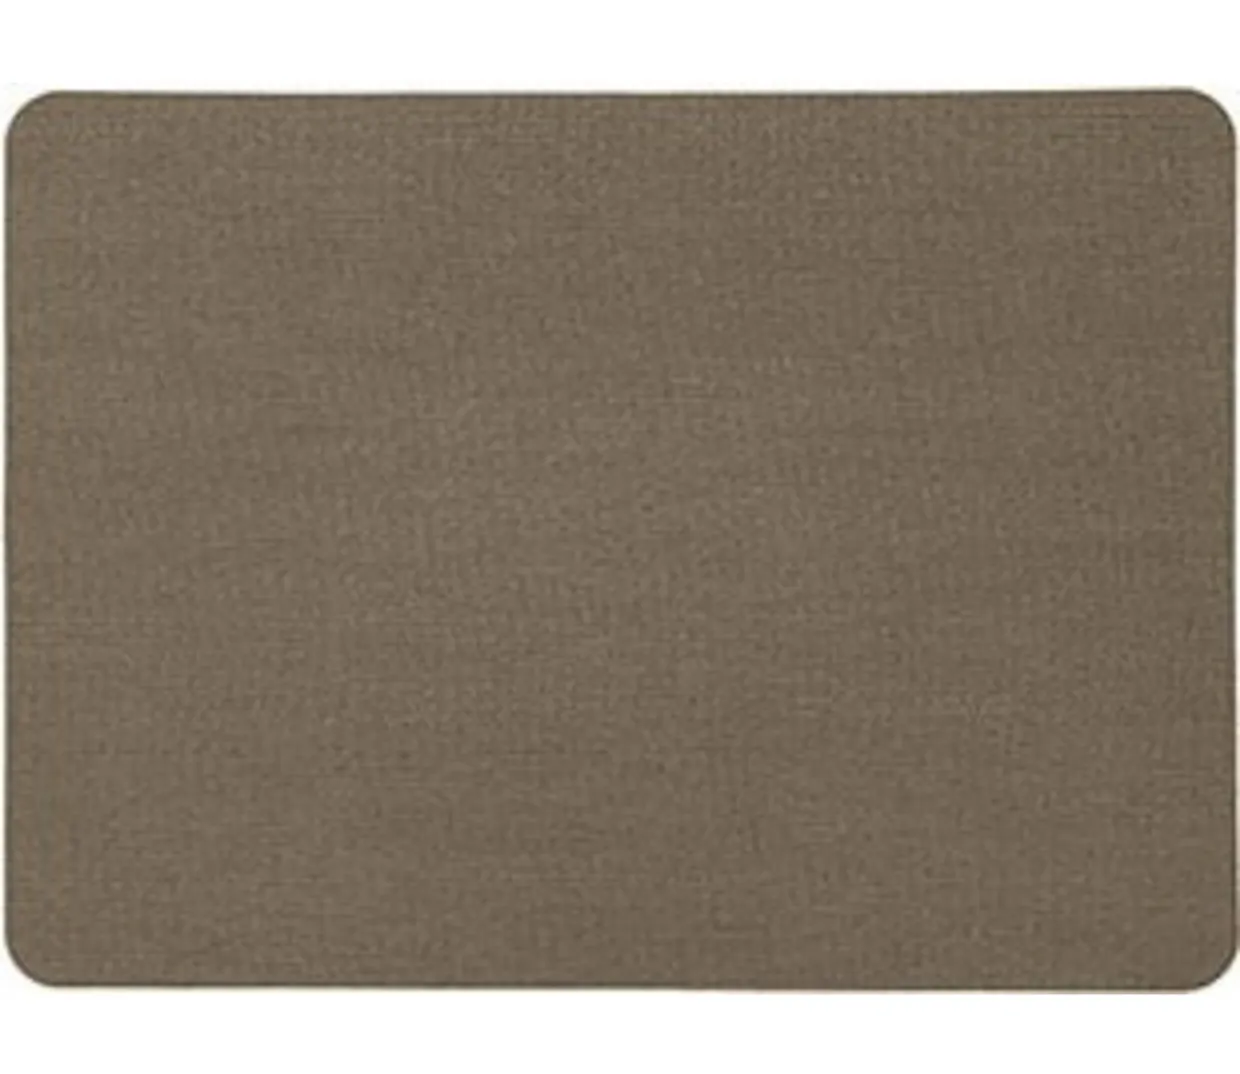 Placemat canvaslook rechthoek taupe - 45 x 30 cm